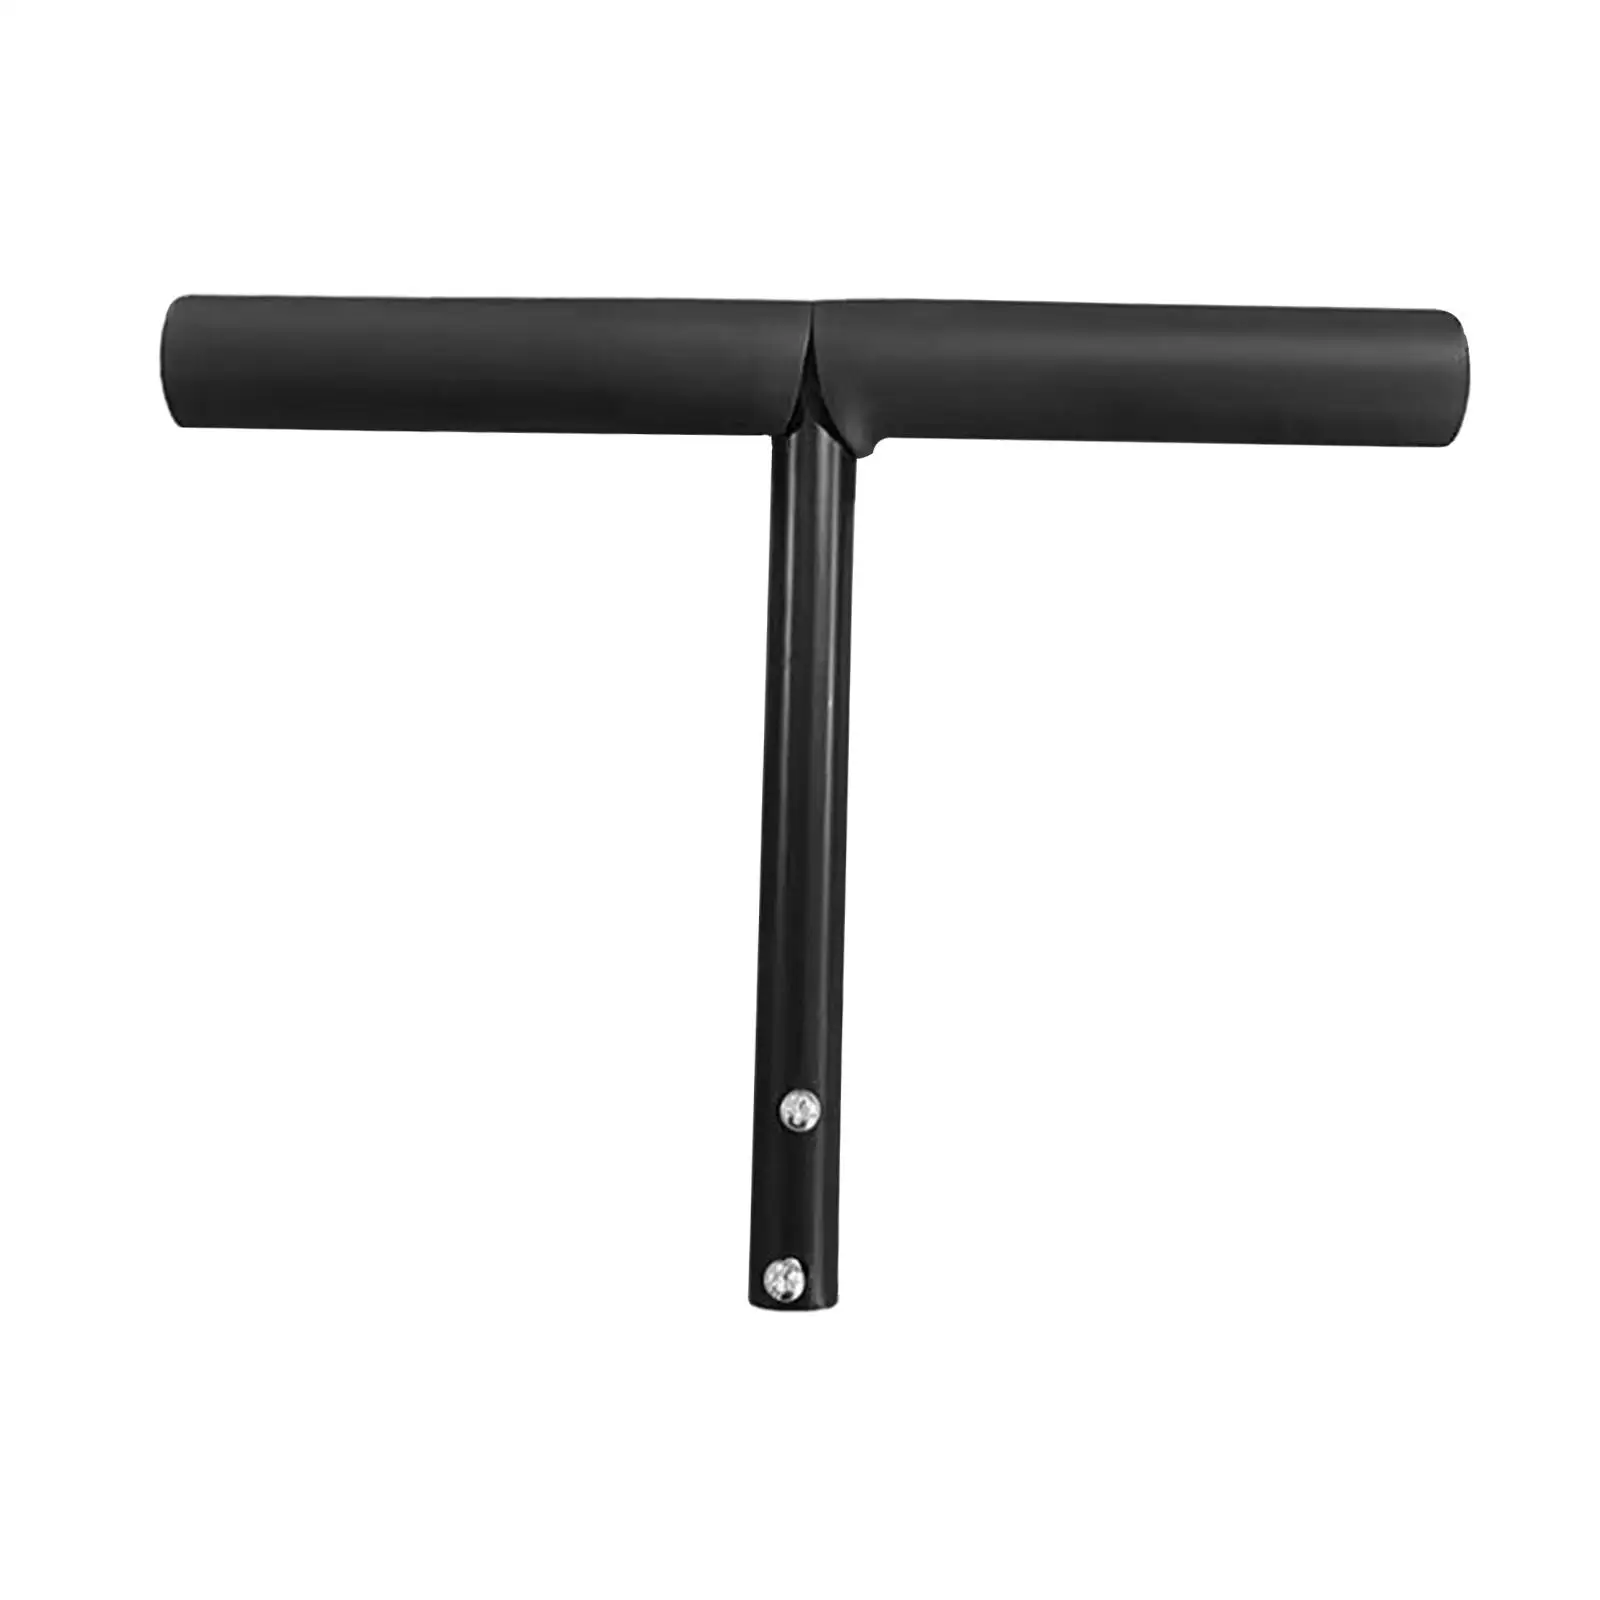 T Shaped Push Handle Bar Practical Baby Bike Accessory for Travel Outdoor